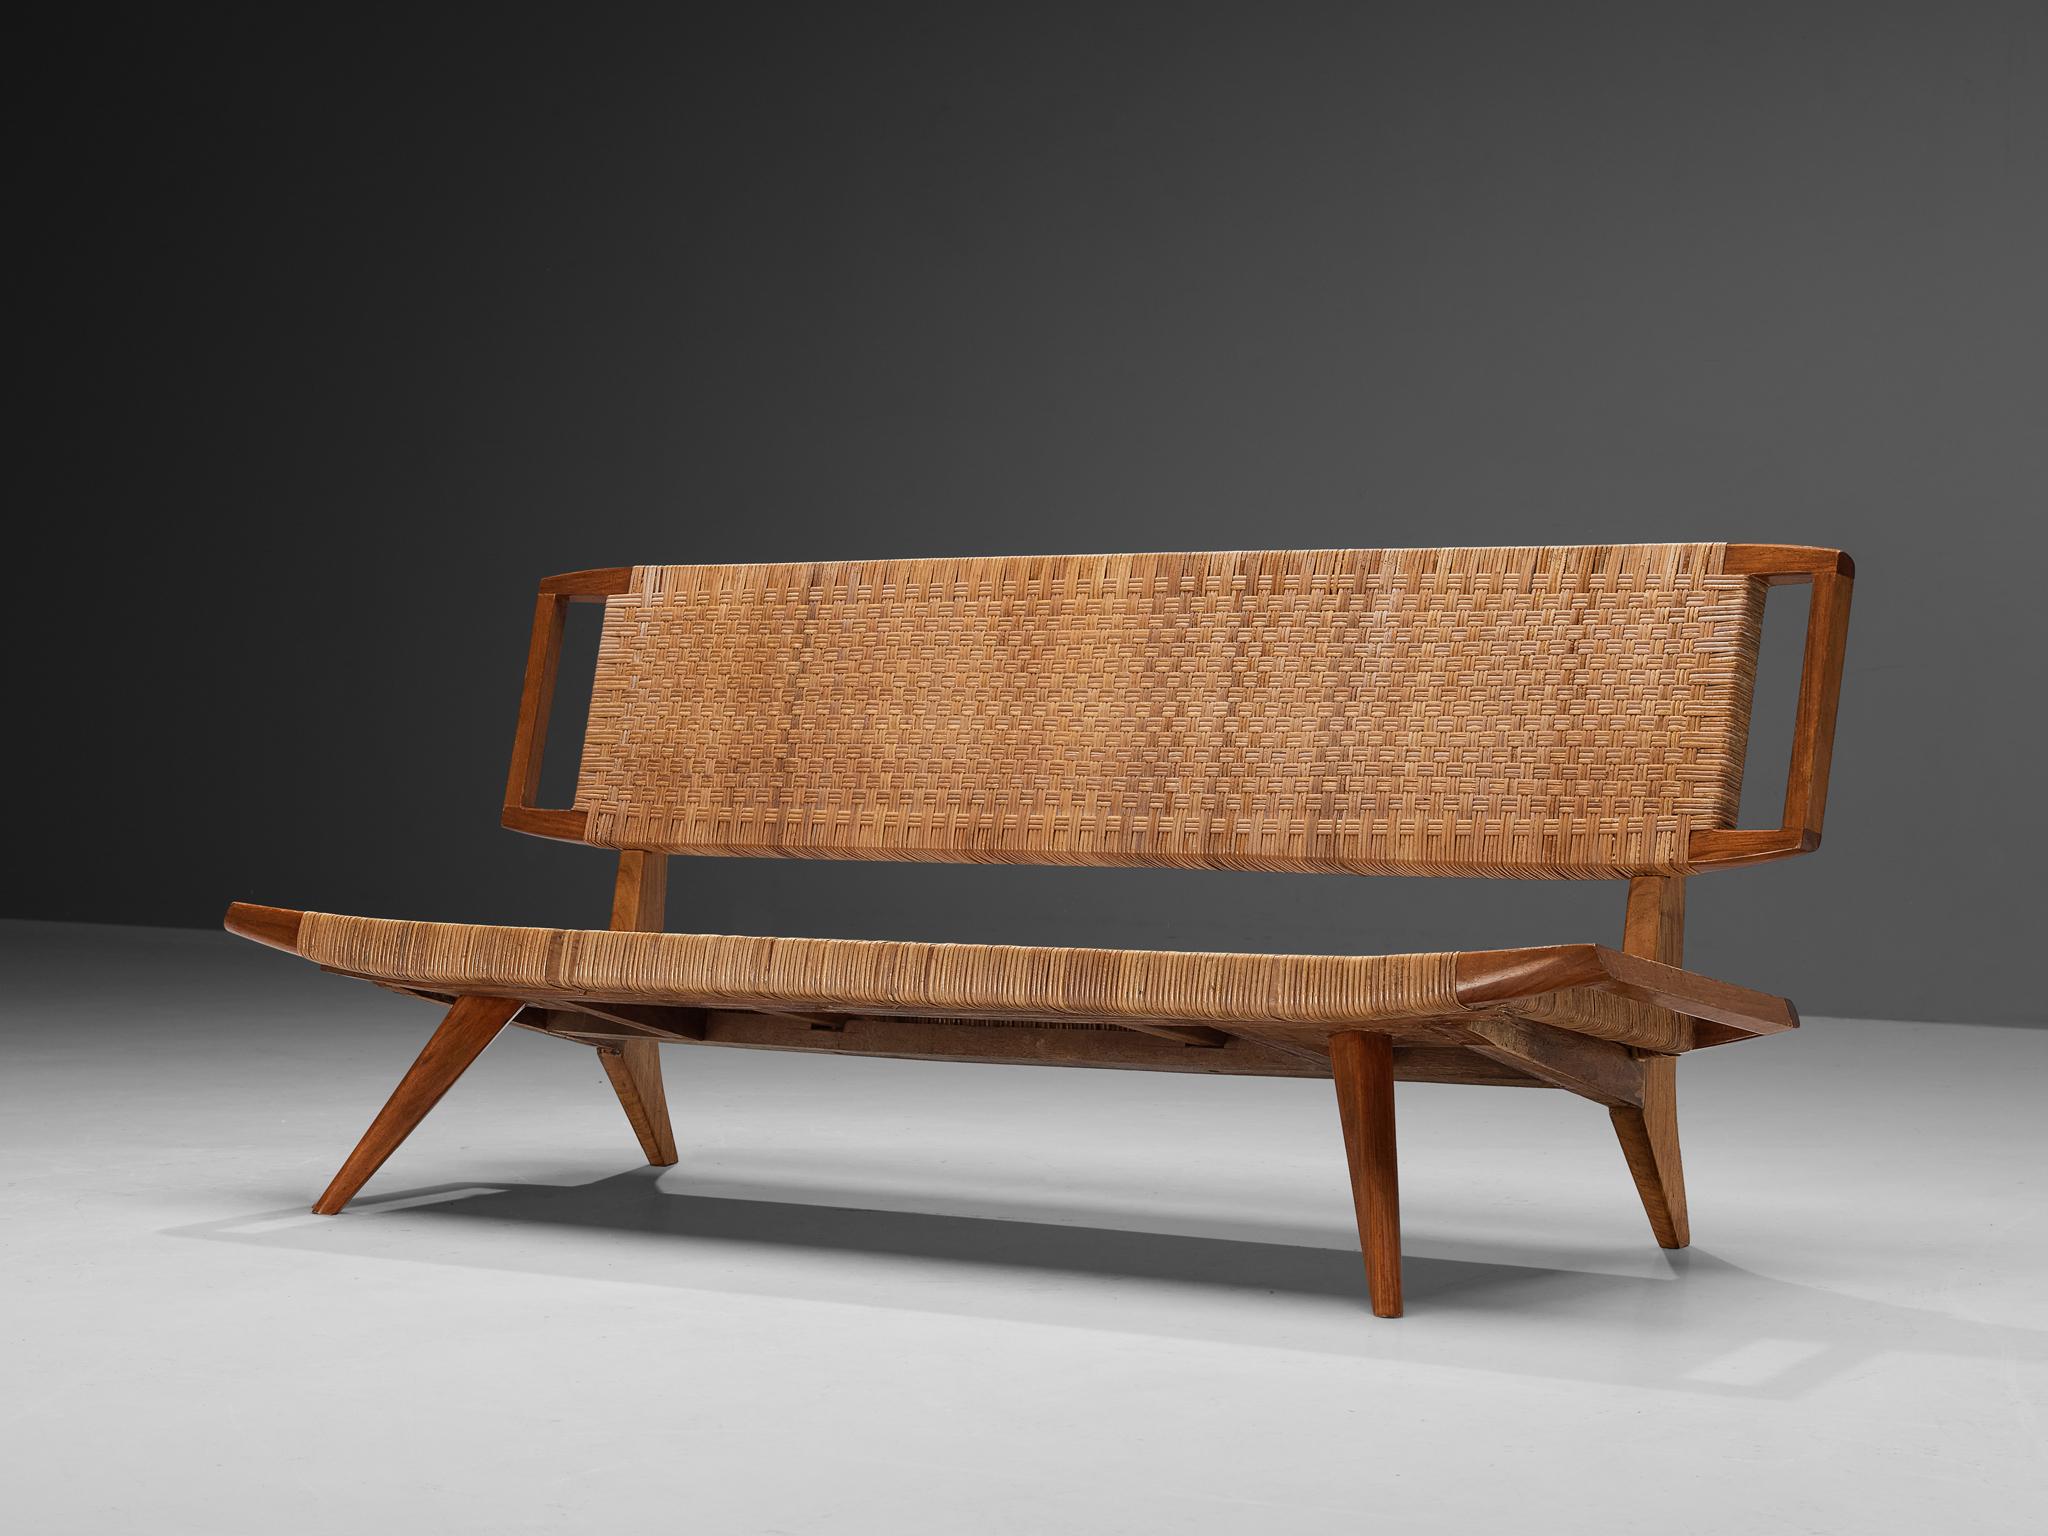 Paul László for Glenn of California, bench or sofa, mahogany, cane, United States, 1950

This sofa or bench, a creation of Paul László, contains a well-preserved caned back and seat. The sofa's legs gracefully angle outward, accentuating their